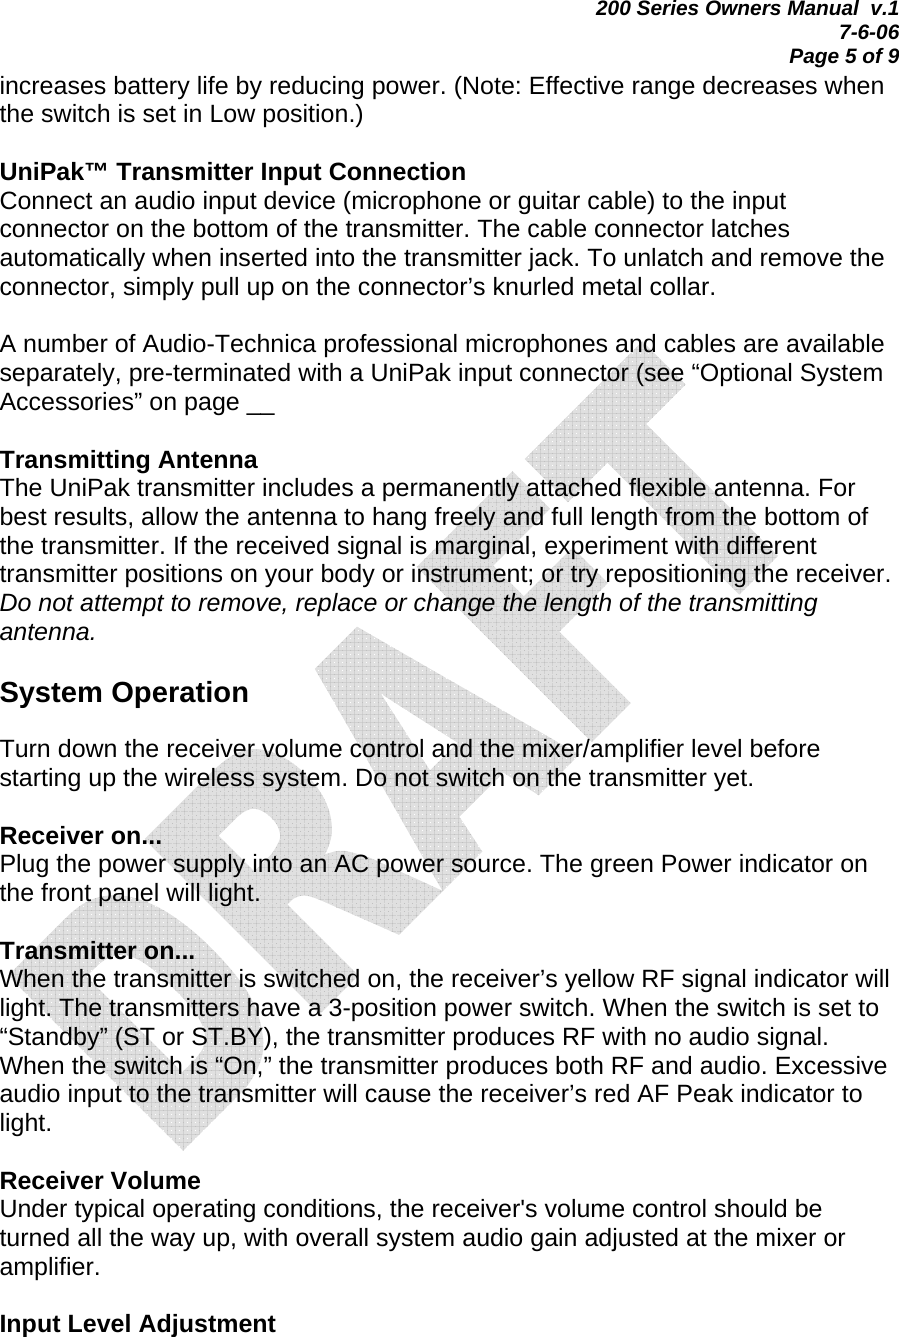 200 Series Owners Manual  v.1 7-6-06 Page 5 of 9 increases battery life by reducing power. (Note: Effective range decreases when the switch is set in Low position.)  UniPak™ Transmitter Input Connection Connect an audio input device (microphone or guitar cable) to the input connector on the bottom of the transmitter. The cable connector latches automatically when inserted into the transmitter jack. To unlatch and remove the connector, simply pull up on the connector’s knurled metal collar.  A number of Audio-Technica professional microphones and cables are available separately, pre-terminated with a UniPak input connector (see “Optional System Accessories” on page __   Transmitting Antenna The UniPak transmitter includes a permanently attached flexible antenna. For best results, allow the antenna to hang freely and full length from the bottom of the transmitter. If the received signal is marginal, experiment with different transmitter positions on your body or instrument; or try repositioning the receiver. Do not attempt to remove, replace or change the length of the transmitting antenna.  System Operation  Turn down the receiver volume control and the mixer/amplifier level before starting up the wireless system. Do not switch on the transmitter yet.  Receiver on... Plug the power supply into an AC power source. The green Power indicator on the front panel will light.  Transmitter on... When the transmitter is switched on, the receiver’s yellow RF signal indicator will light. The transmitters have a 3-position power switch. When the switch is set to “Standby” (ST or ST.BY), the transmitter produces RF with no audio signal. When the switch is “On,” the transmitter produces both RF and audio. Excessive audio input to the transmitter will cause the receiver’s red AF Peak indicator to light.  Receiver Volume Under typical operating conditions, the receiver&apos;s volume control should be turned all the way up, with overall system audio gain adjusted at the mixer or amplifier.  Input Level Adjustment 